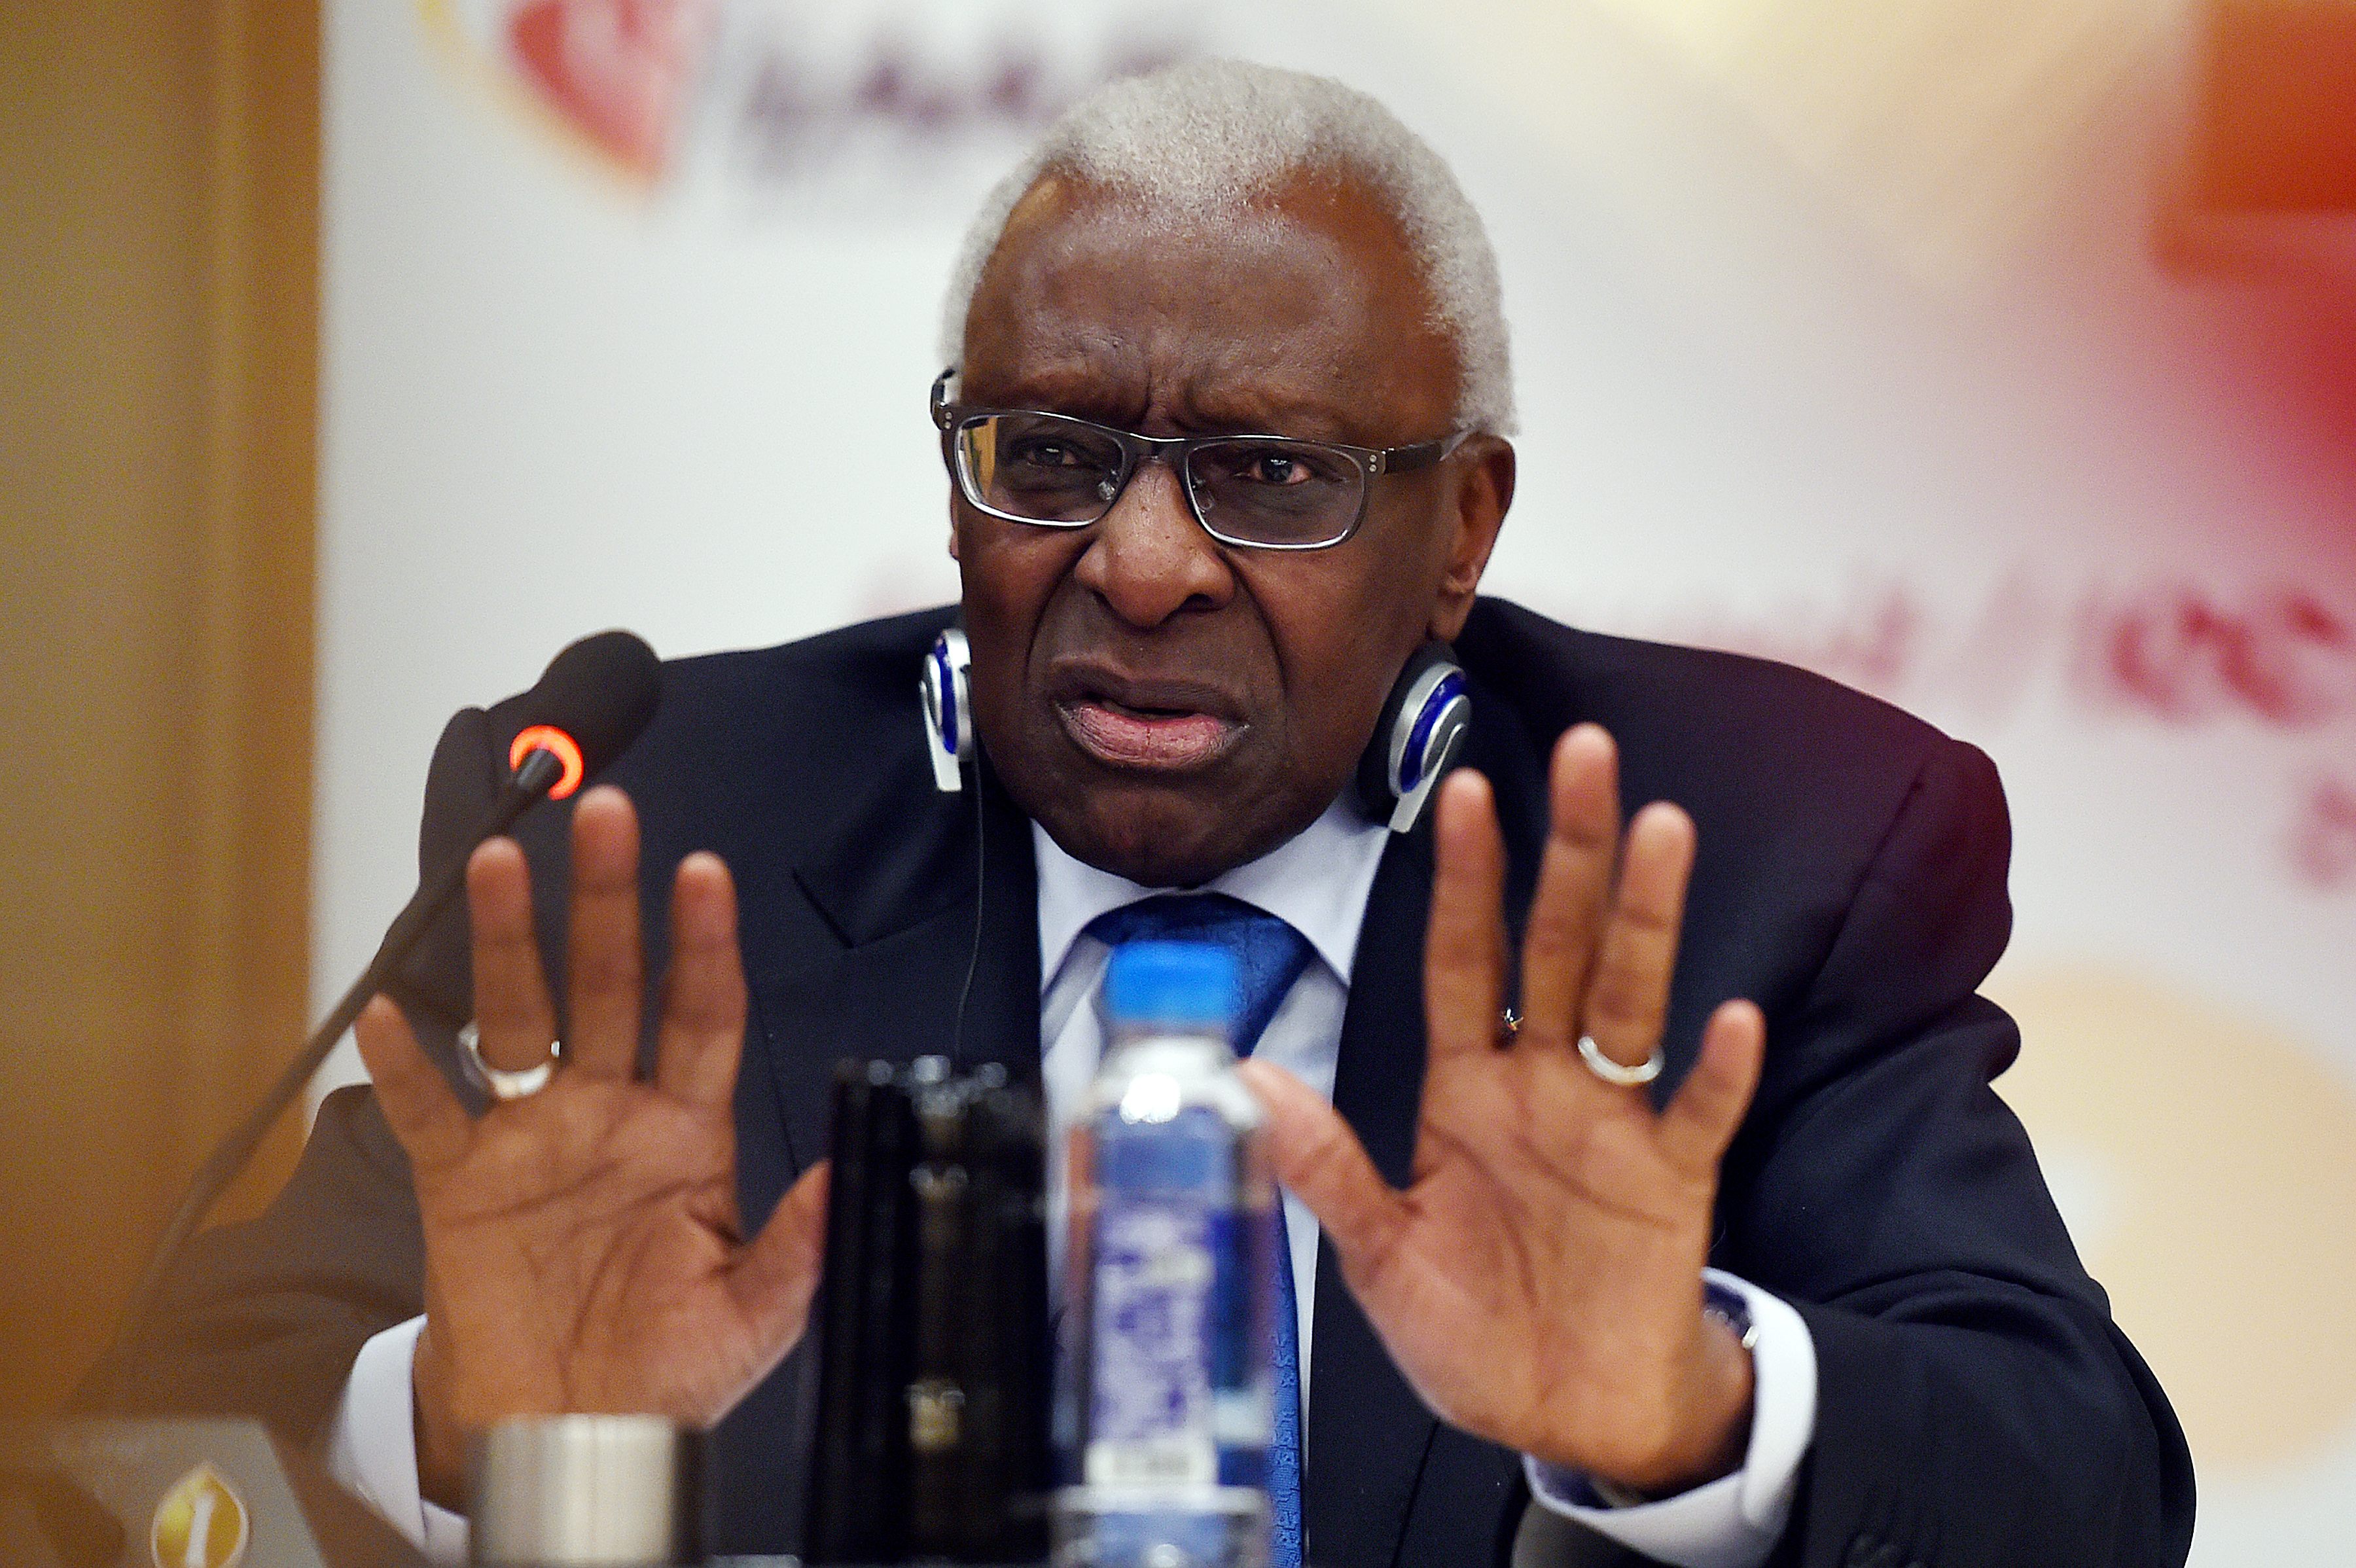 (FILES) This file photo taken on August 21, 2015 shows outgoing International Association of Athletics Federations (IAAF) president Lamine Diack gesturing during a press conference in Beijing, ahead of the 2015 IAAF World Championships. French investigators on December 21, 2015 hit former IAAF president Lamine Diack with new corruption charges linked to doping cover-ups in world athletics, a source close to the inquiry told AFP. / AFP / Greg Baker